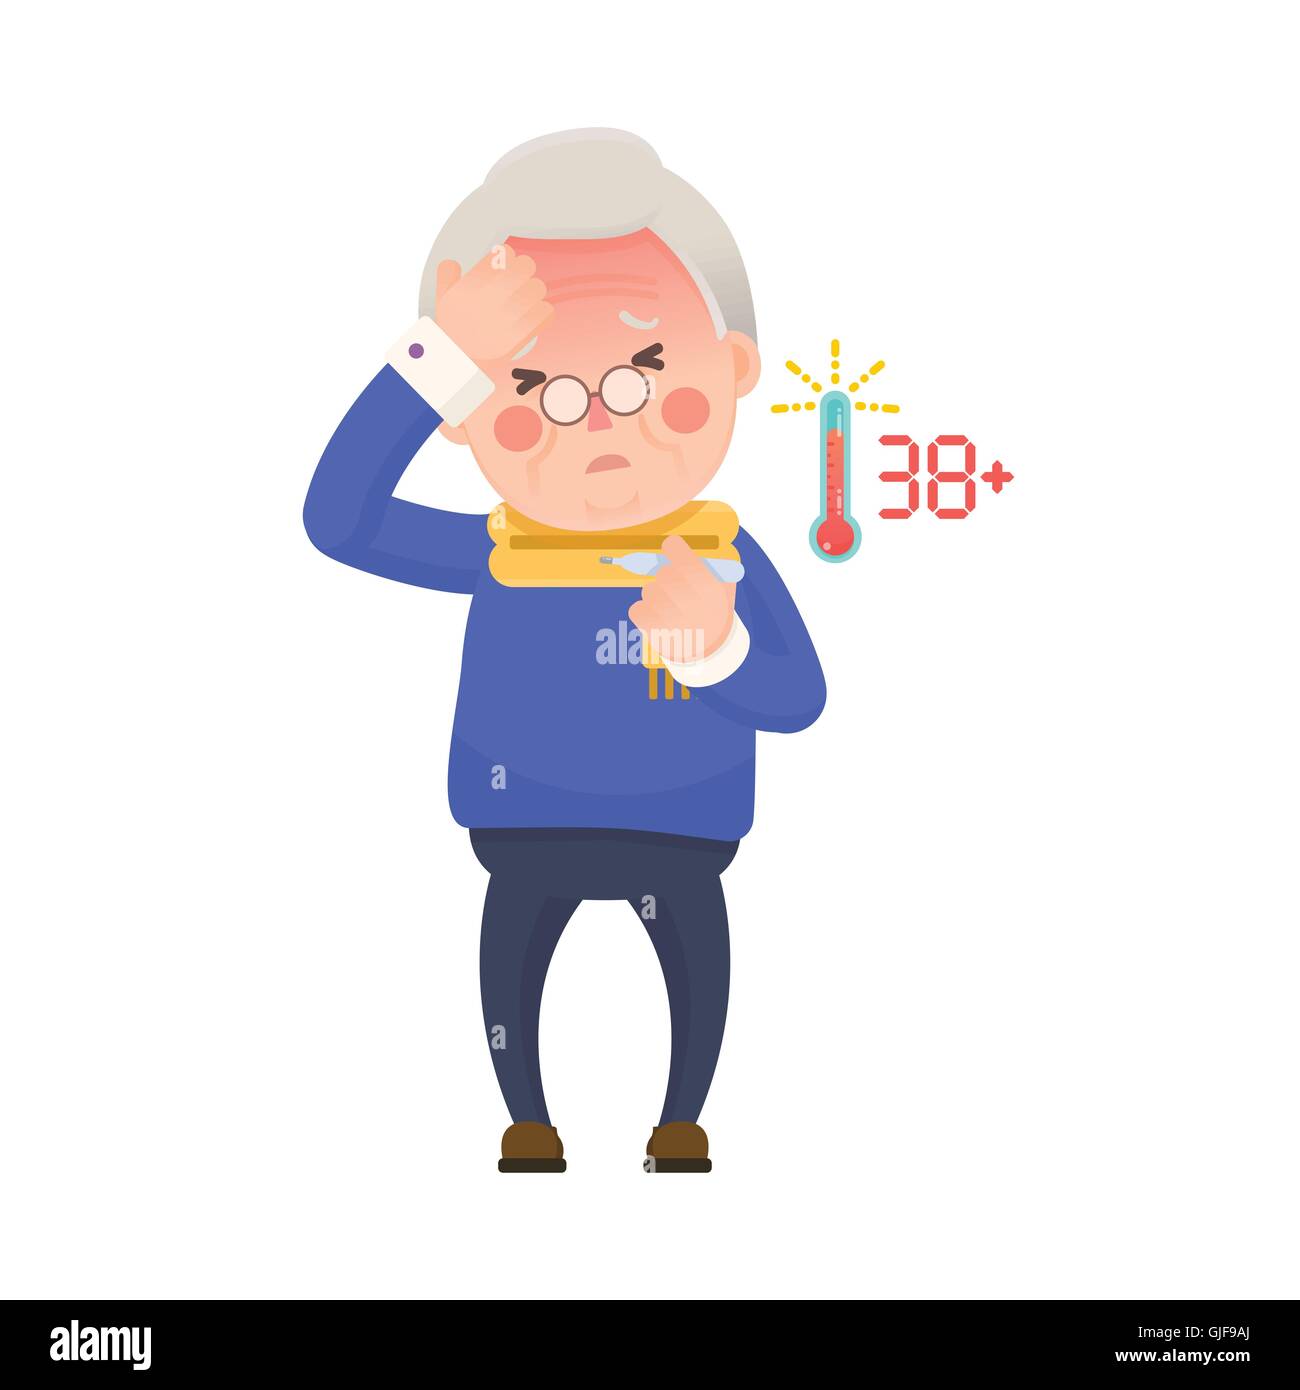 Vector Illustration of Sick Old Man Suffering from a Fever and Checking His Temperature on a Thermometer while Clutching at His Stock Vector